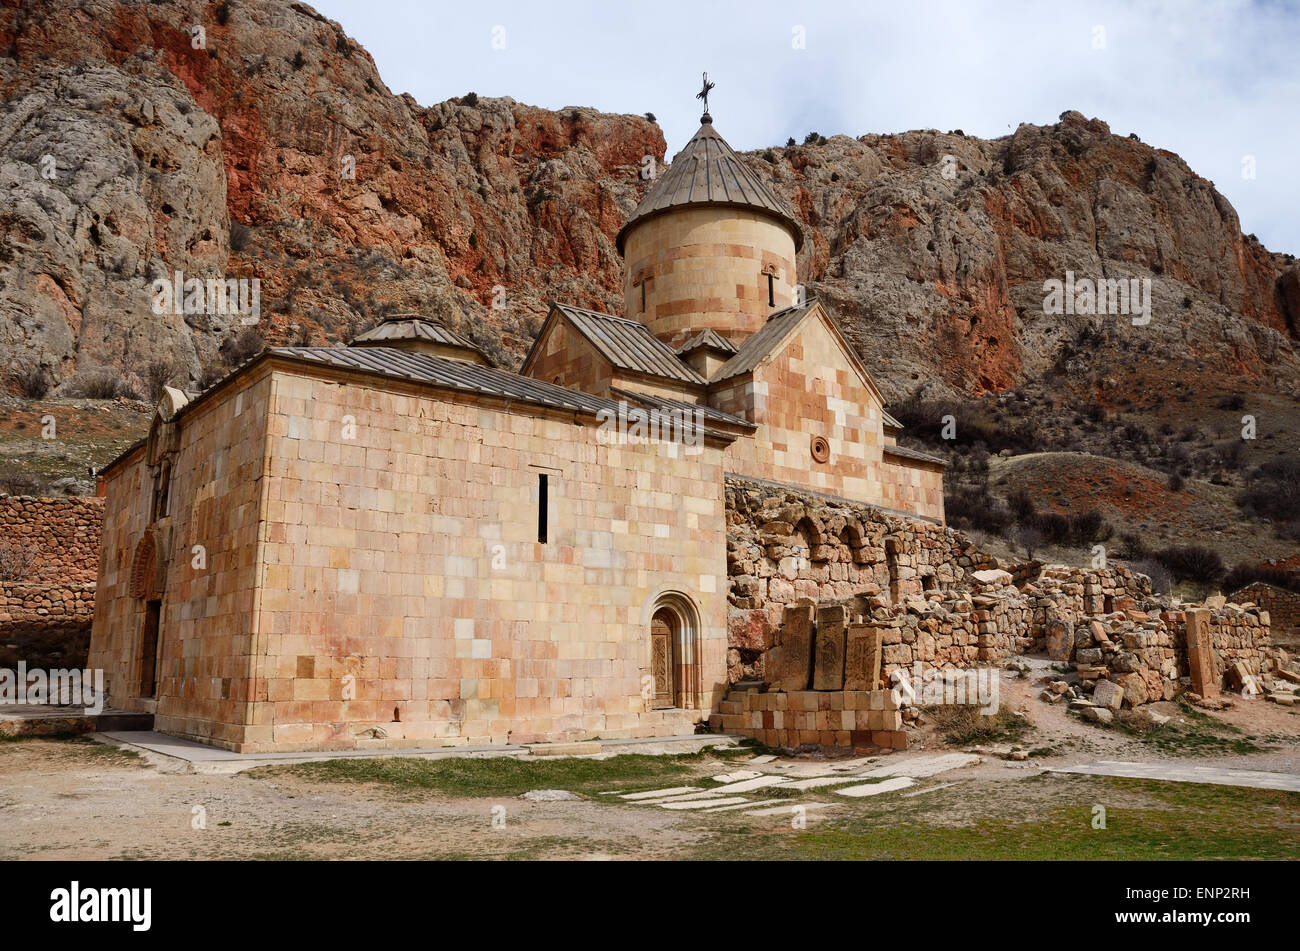 Church of Surb Karapet (St. John the Baptist) in Noravank orthodox monastery, located in gorge made by Amaghu River,Armenia Stock Photo